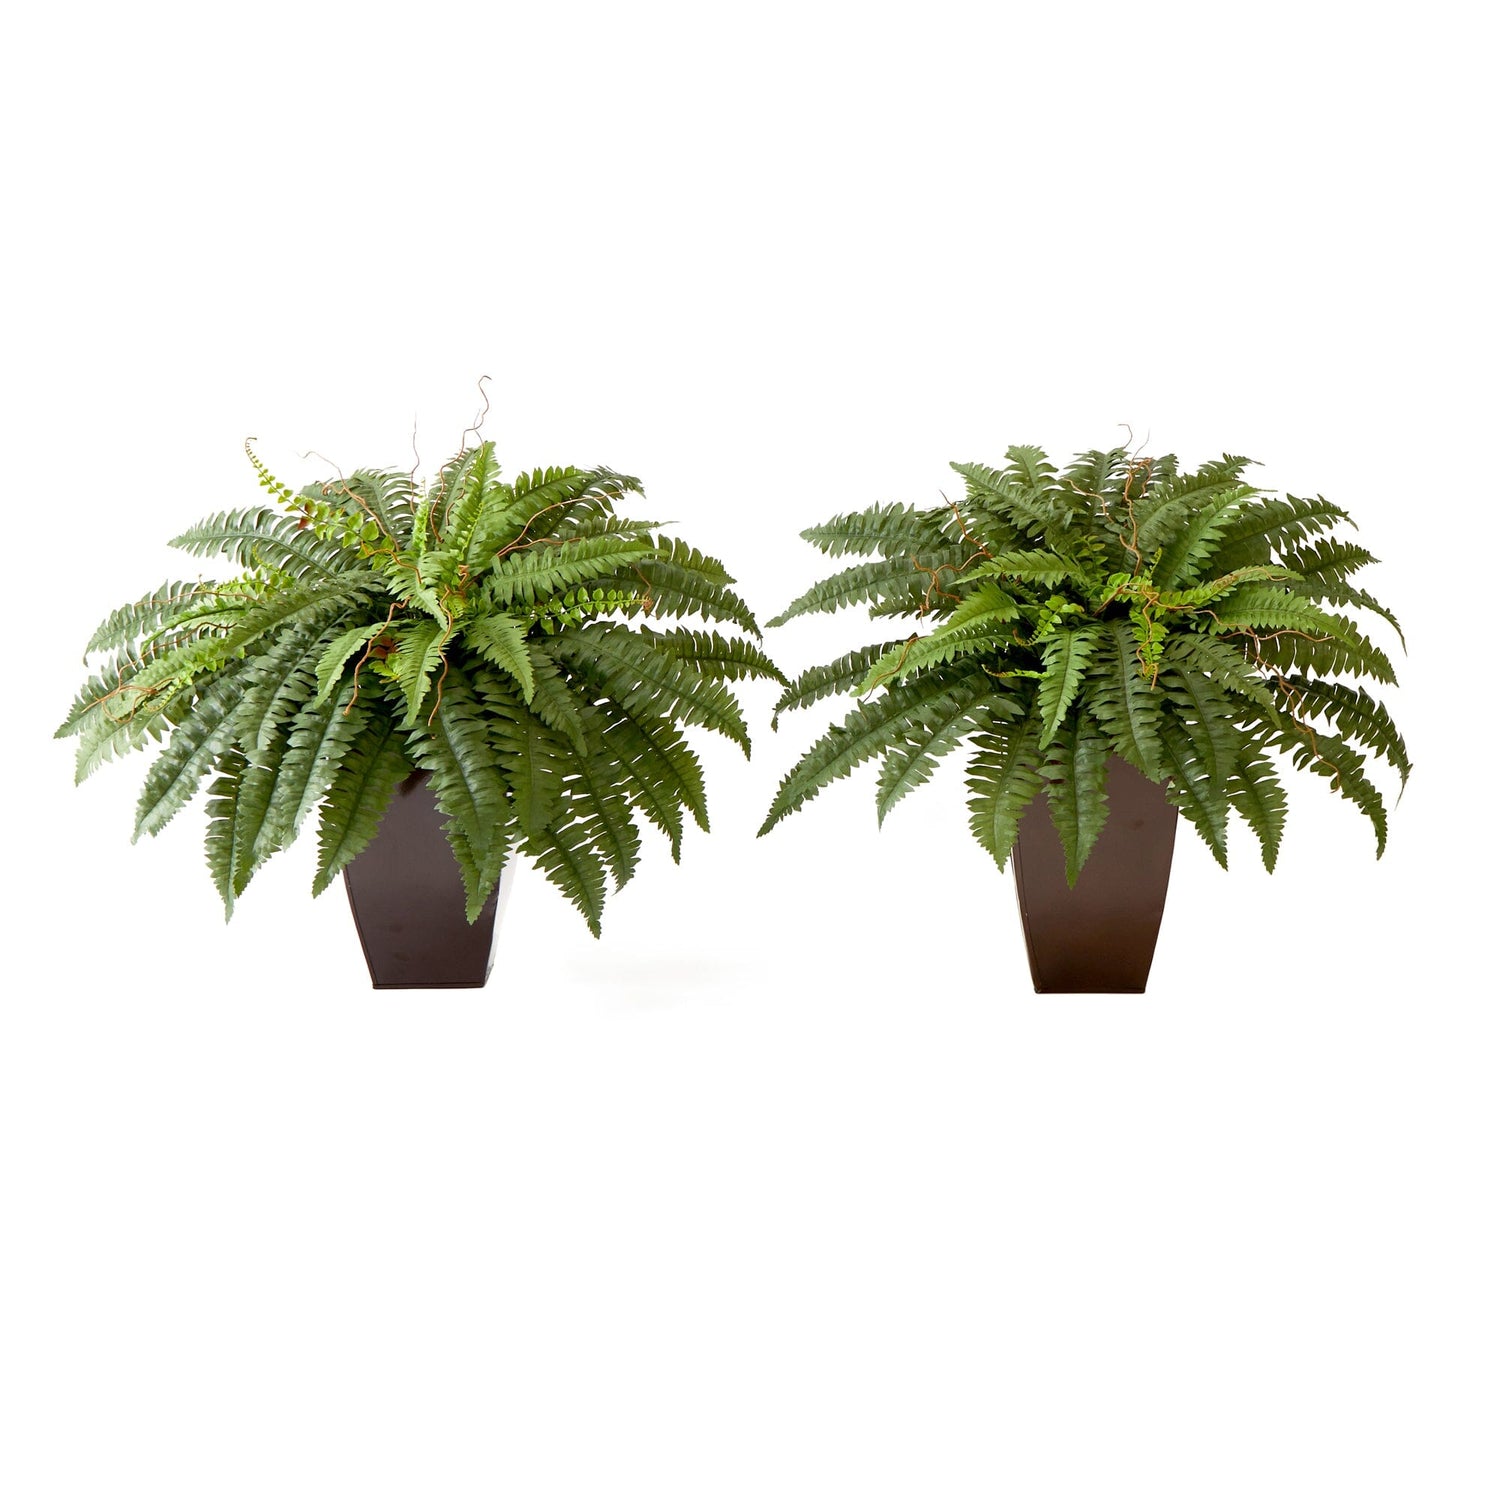 23” Artificial Boston Fern Plant with Tapered Bronze Square Metal Planter DIY KIT - Set of 2